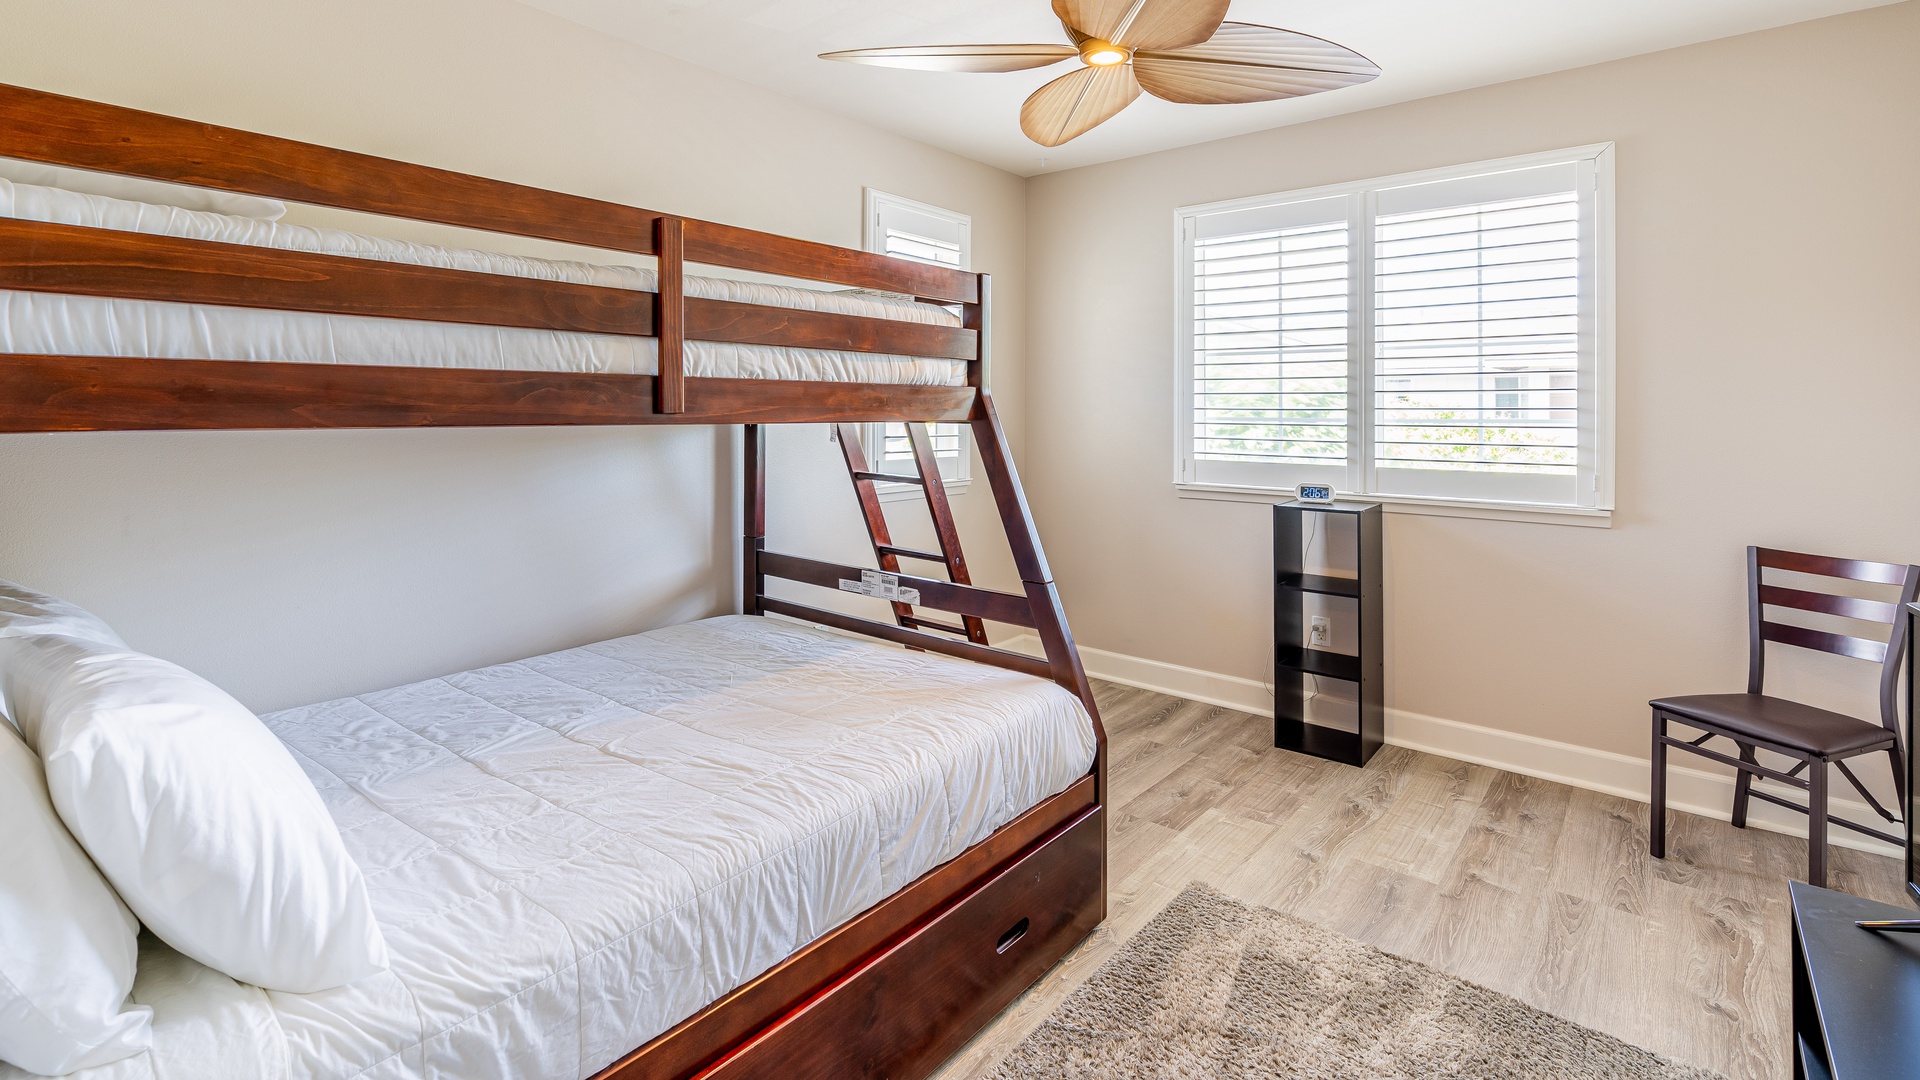 Kapolei Vacation Rentals, Hillside Villas 1508-2 - The third guest bedroom is bright and spacious.